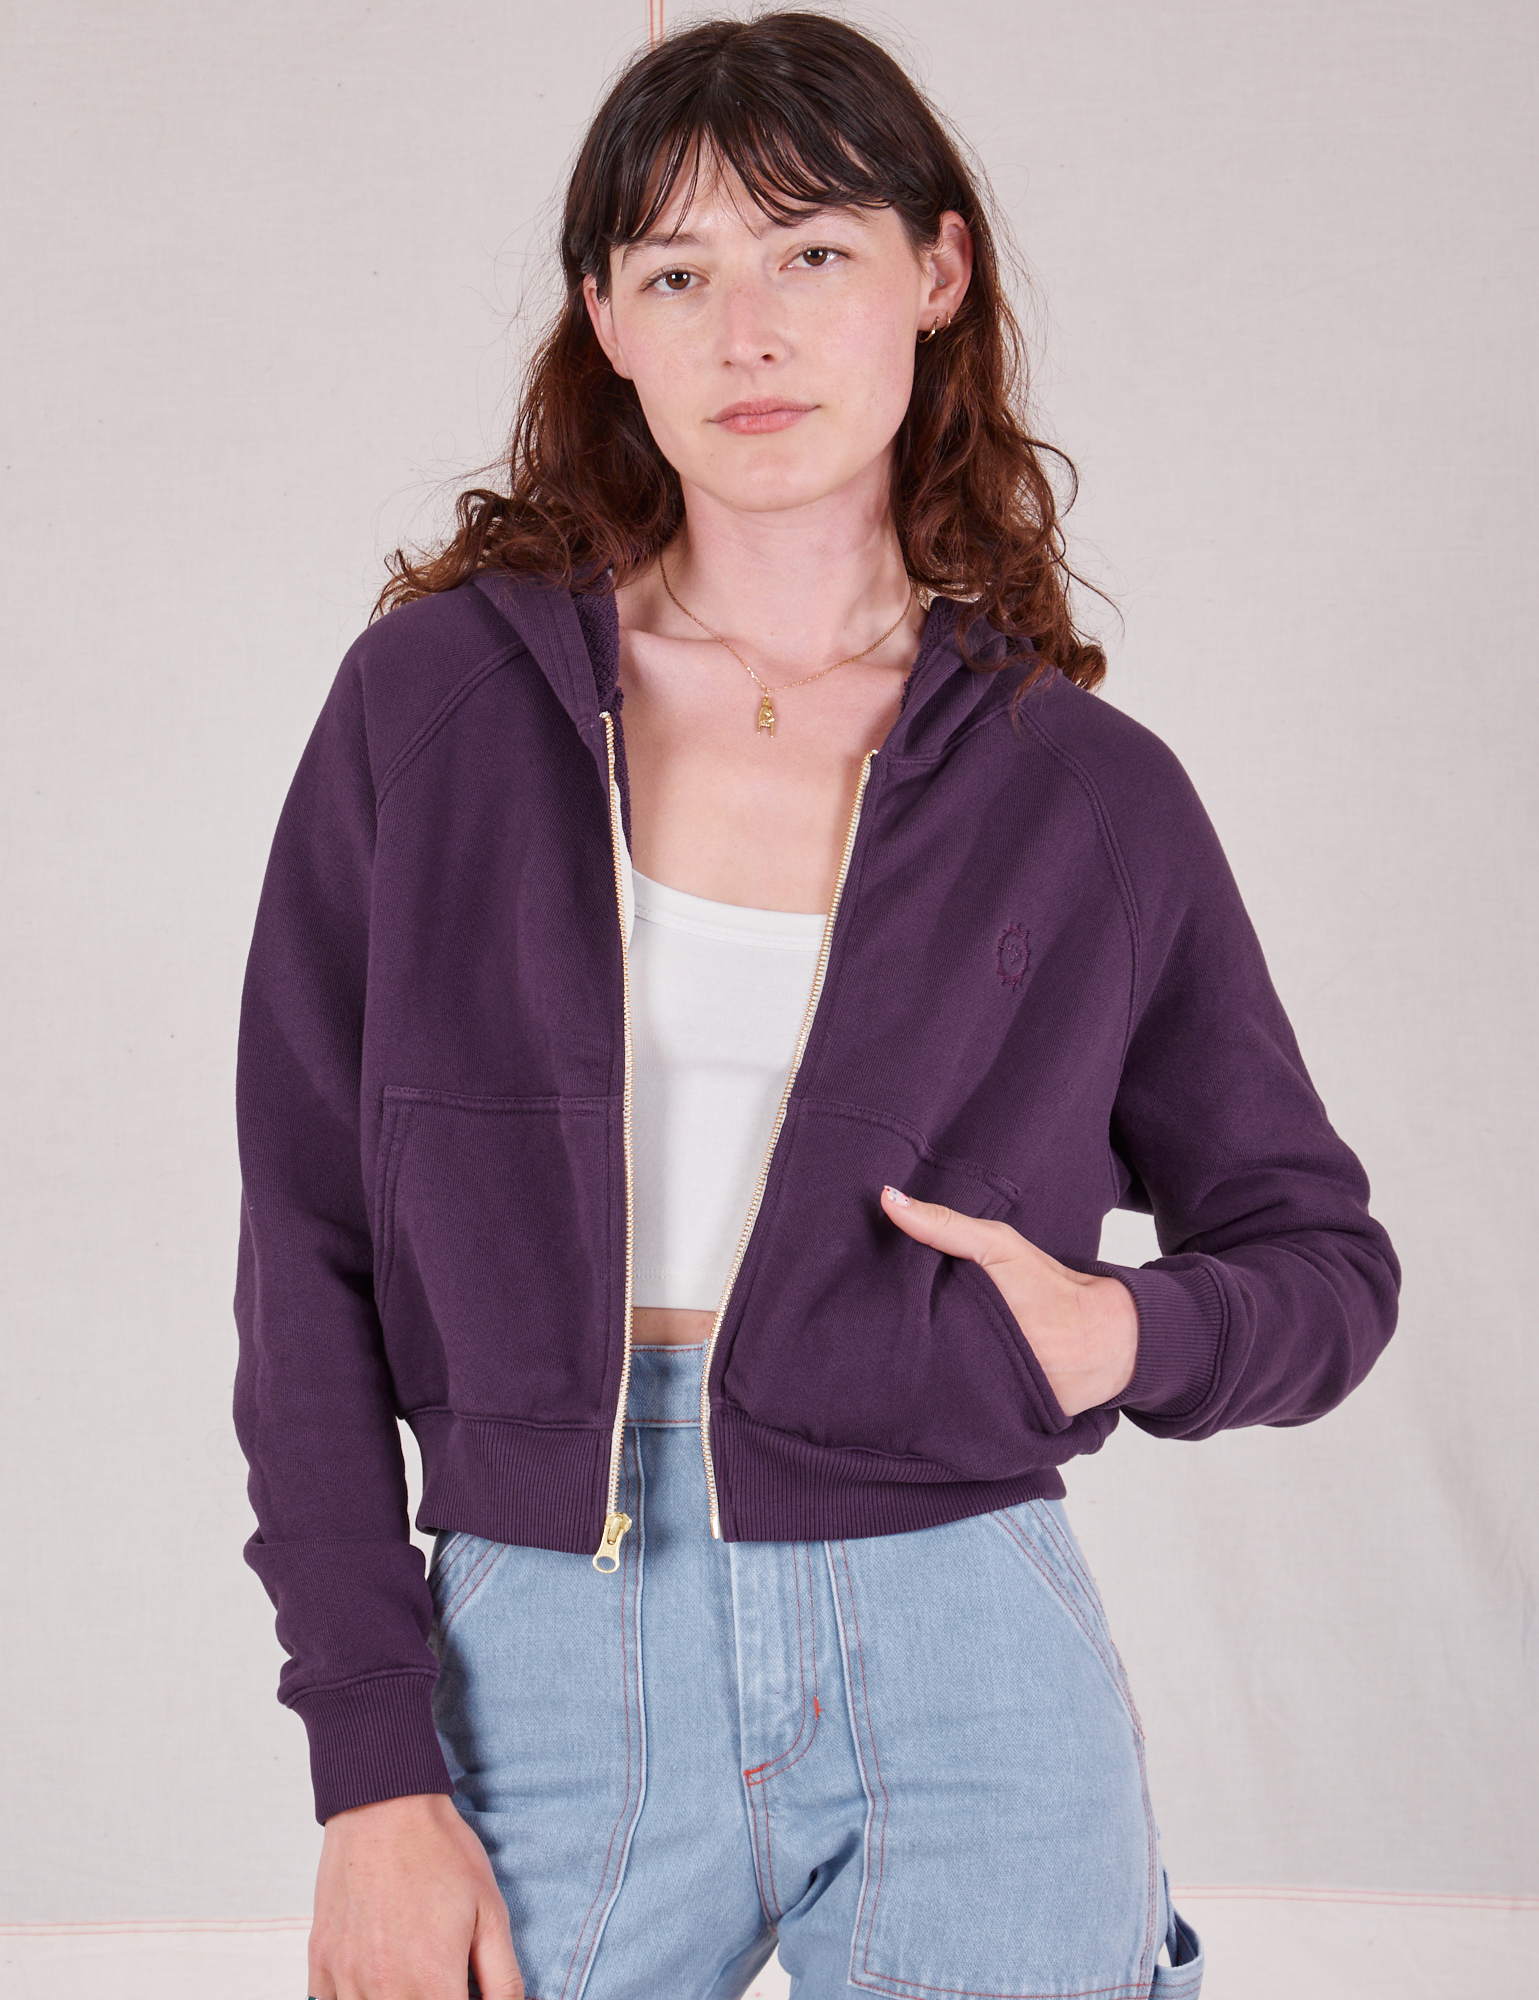 Alex is 5&#39;8&quot; and wearing P Cropped Zip Hoodie in Nebula Purple with a vintage off-white Cropped Tank underneath